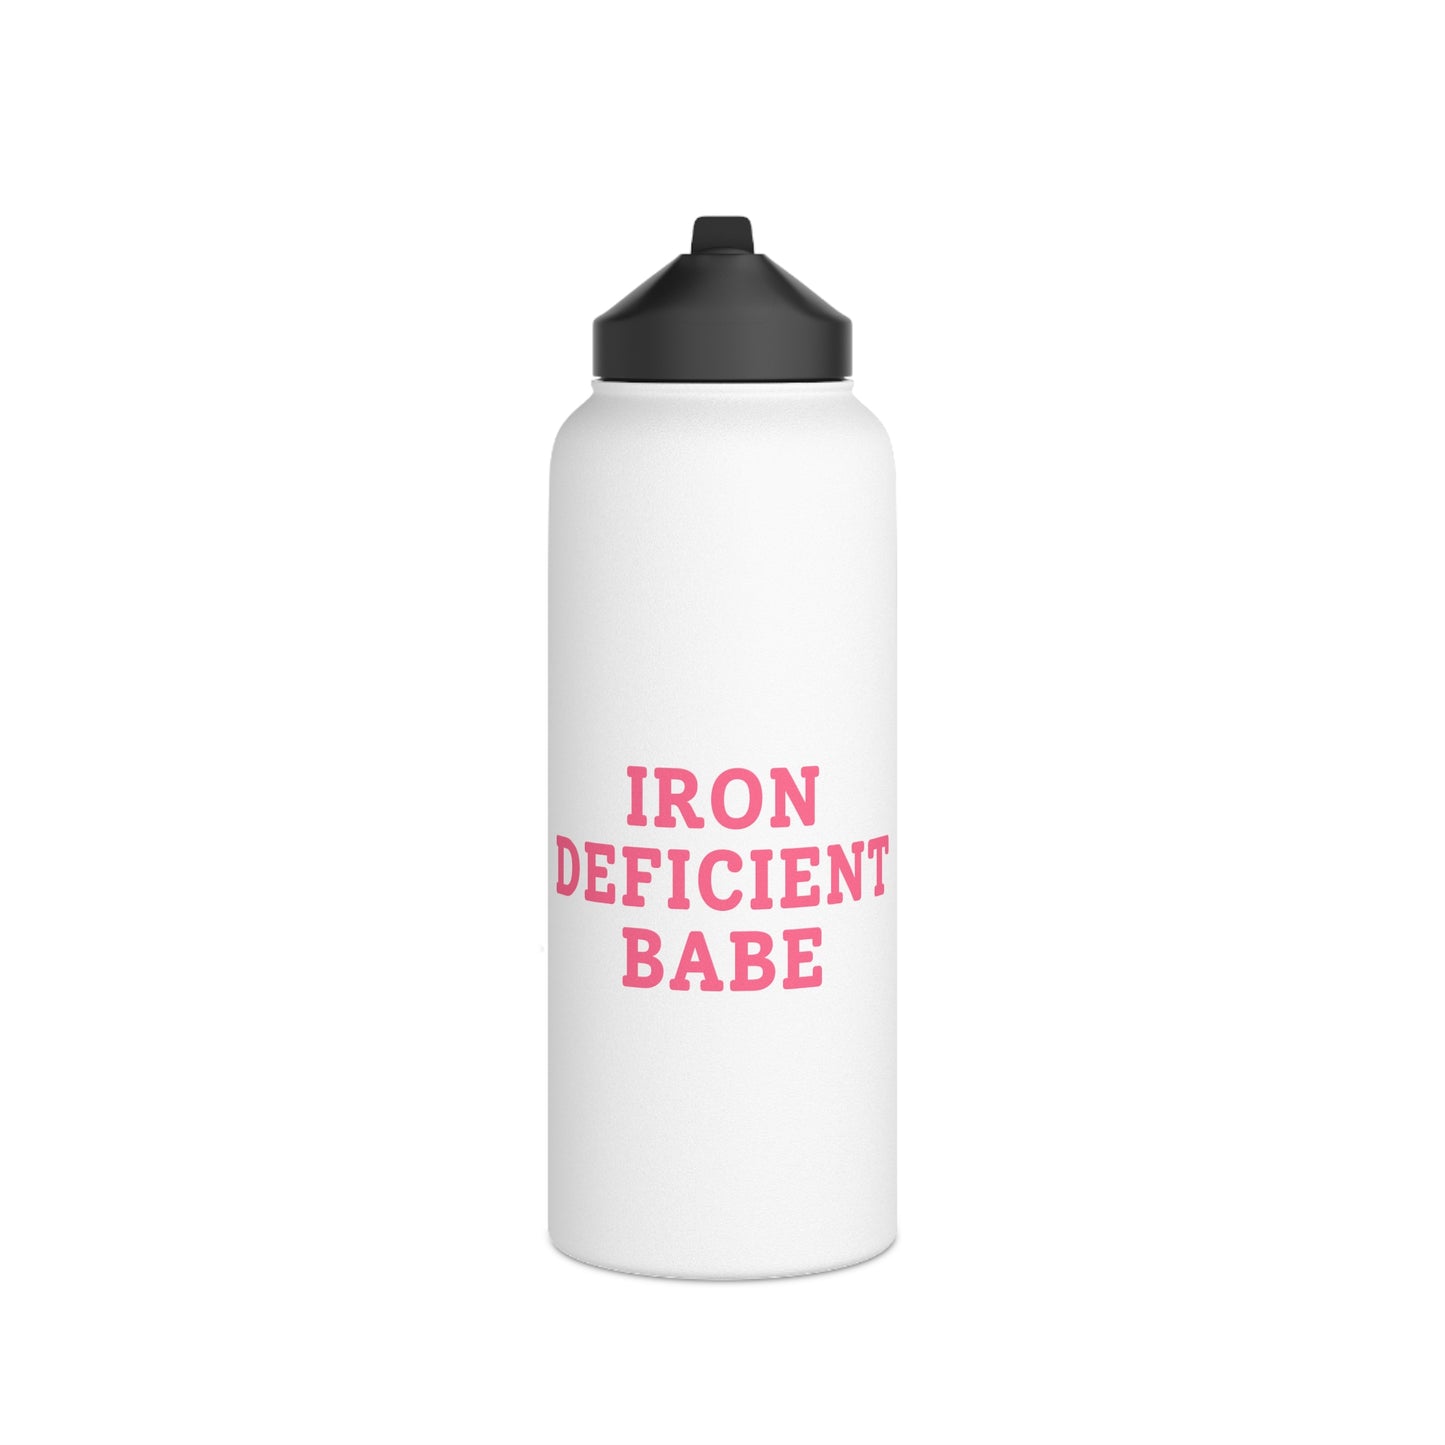 Iron Deficient Babe - Stainless Steel Water Bottle